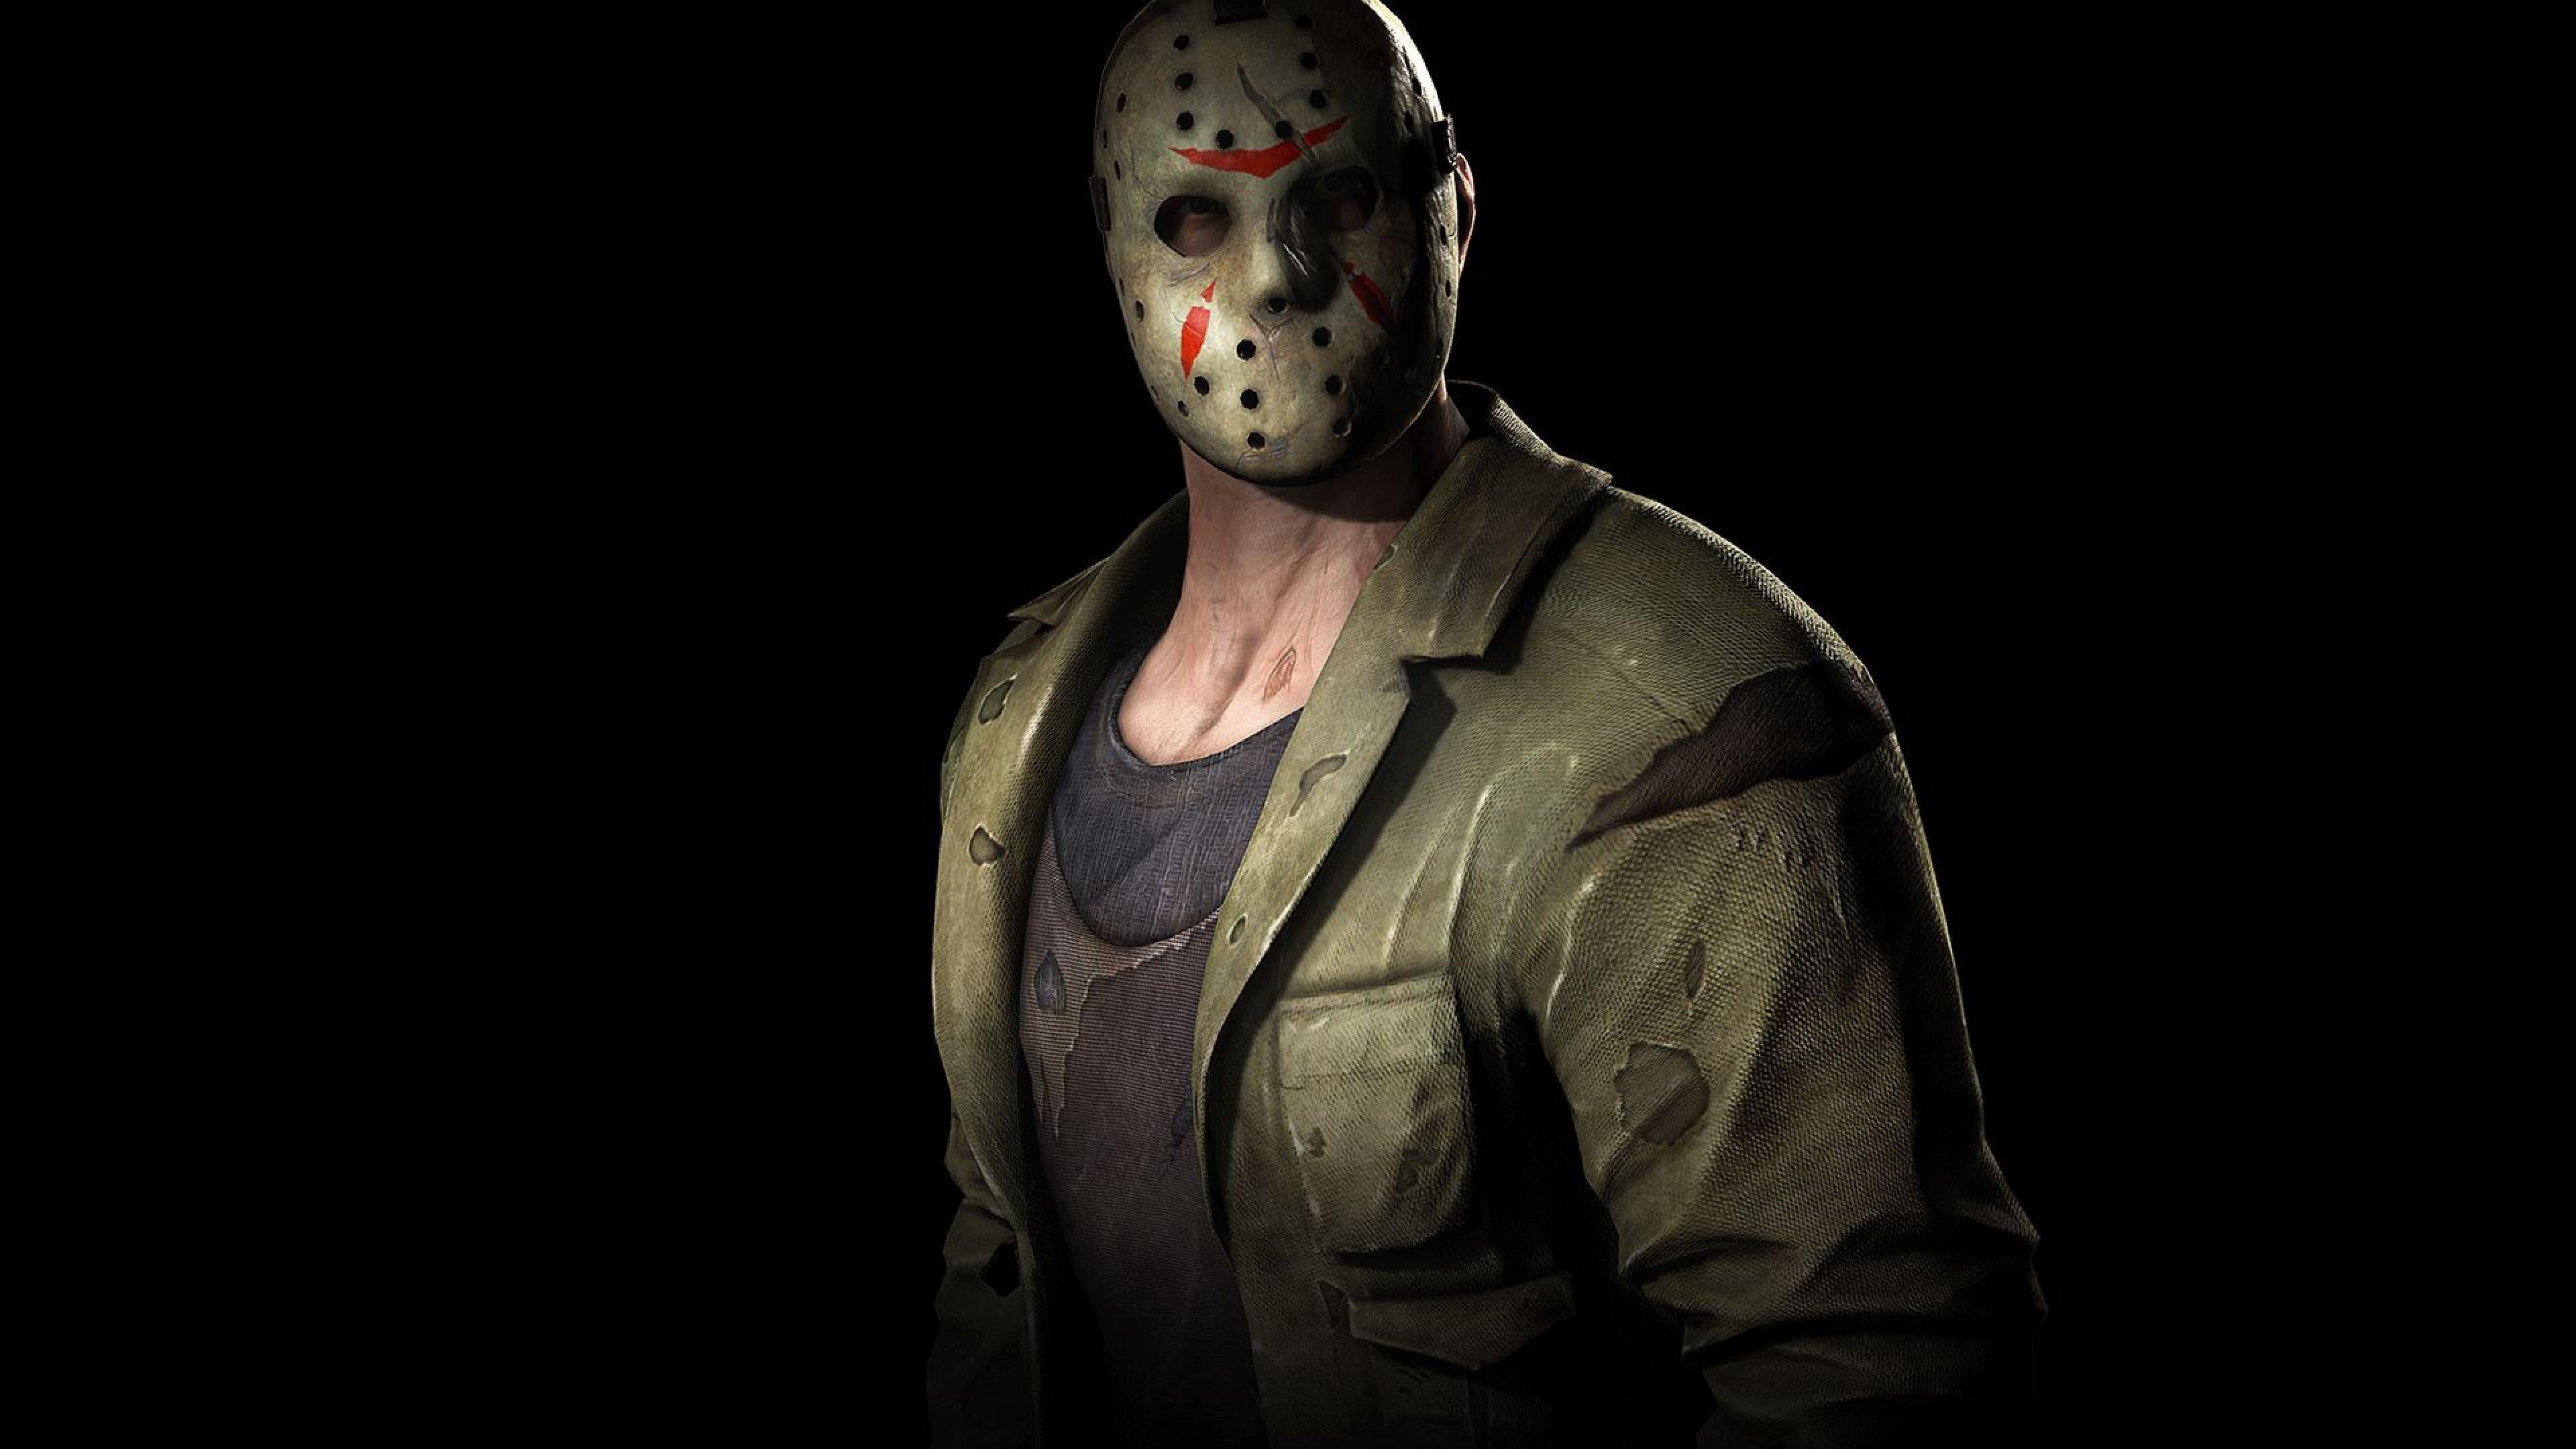 Download Wallpaper 3840x2160 Jason voorhees, Friday the 13th